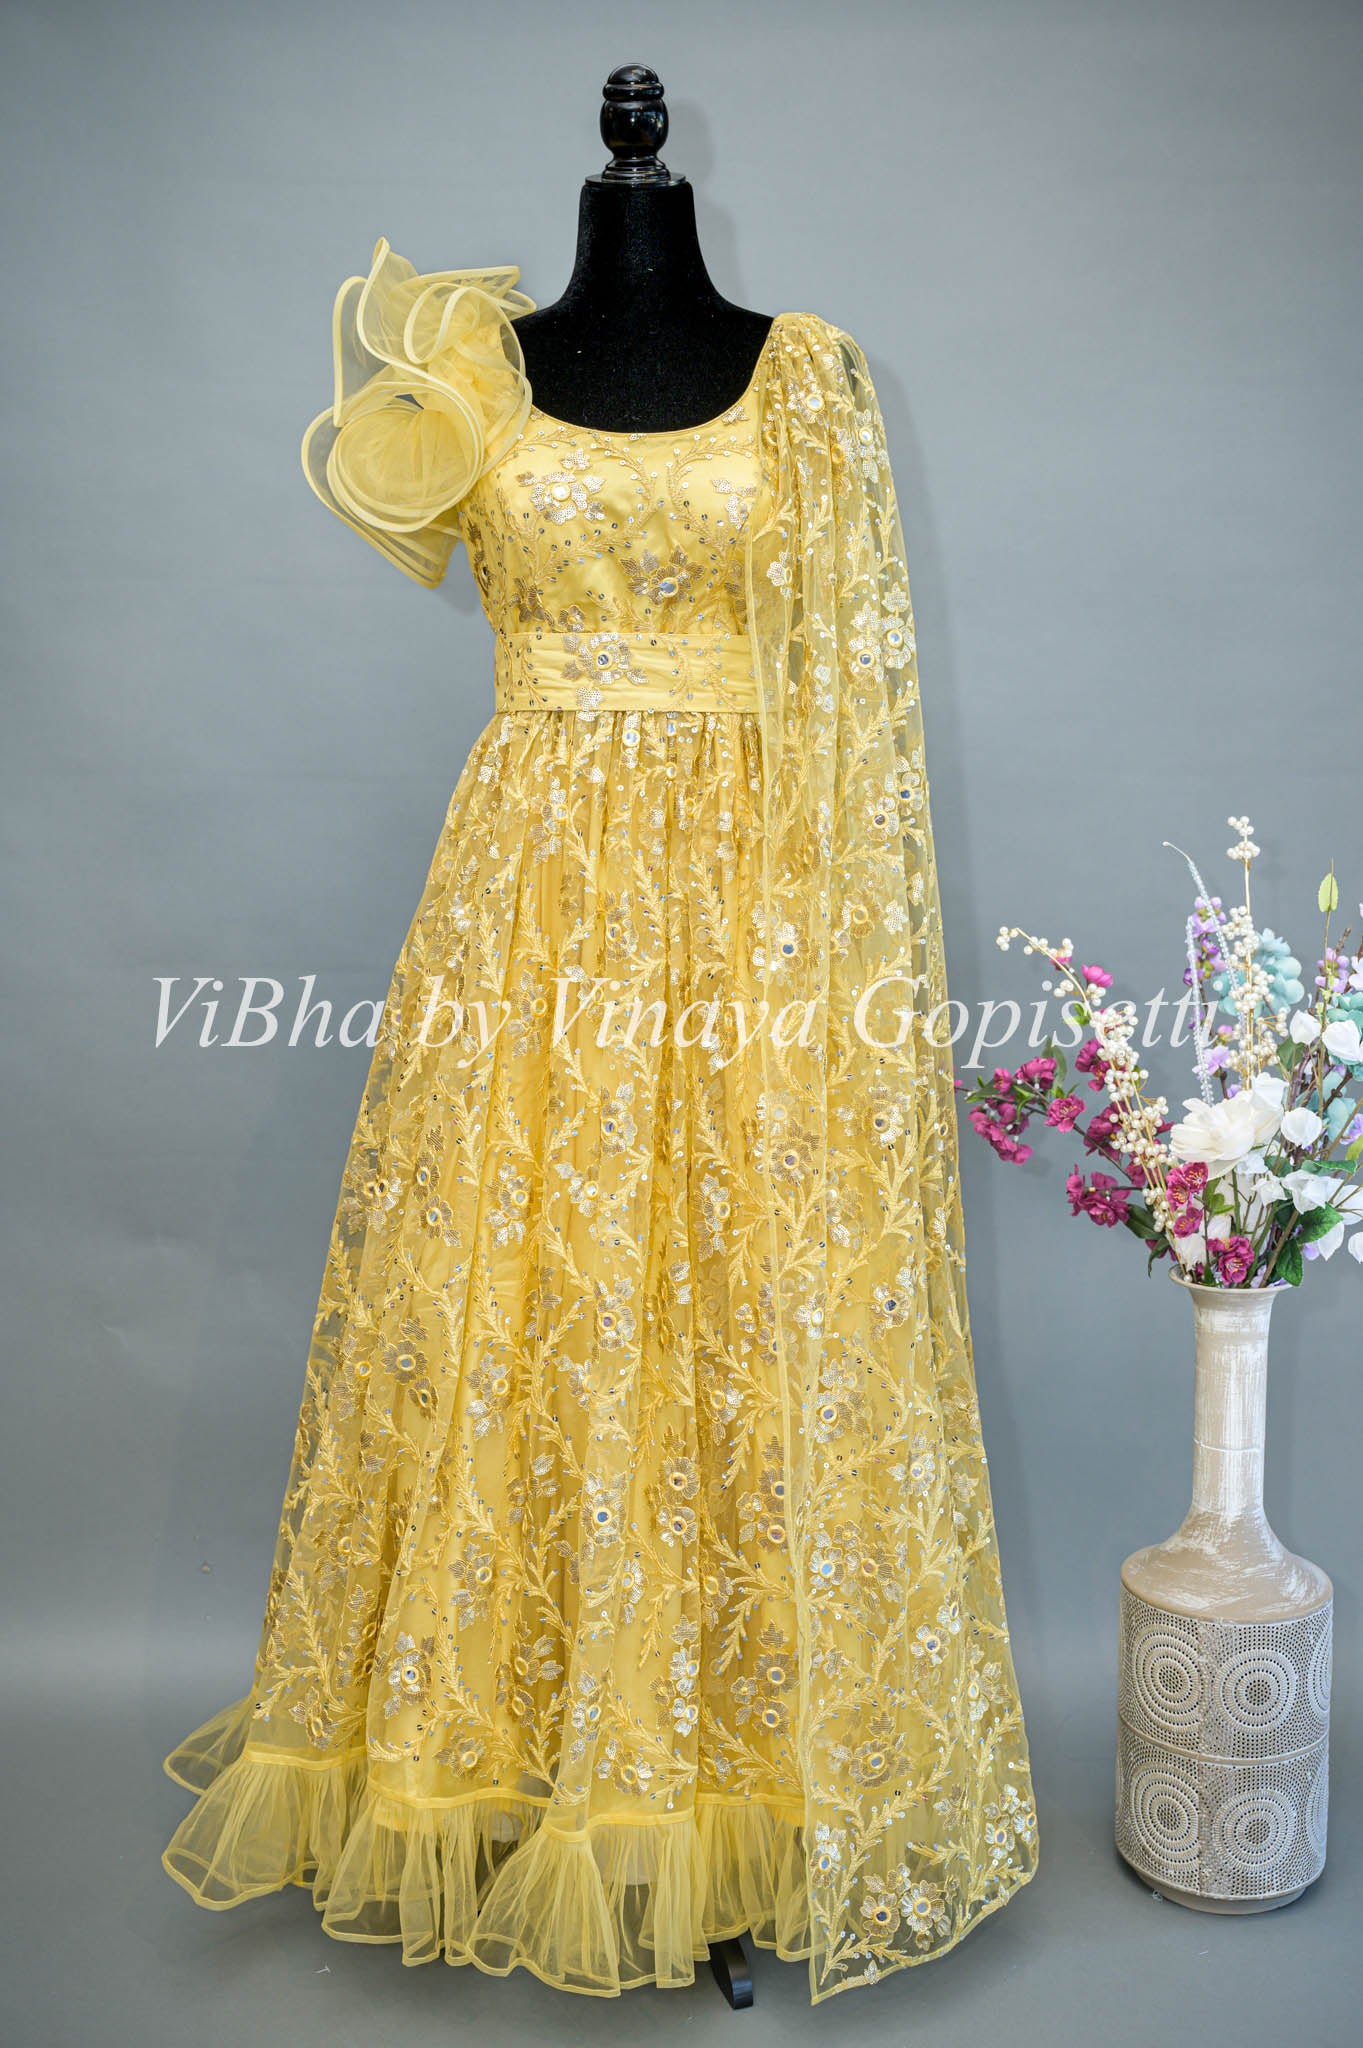 Authentic Yellow Colored Net Long Gown With Dupatta – Cygnus Fashion